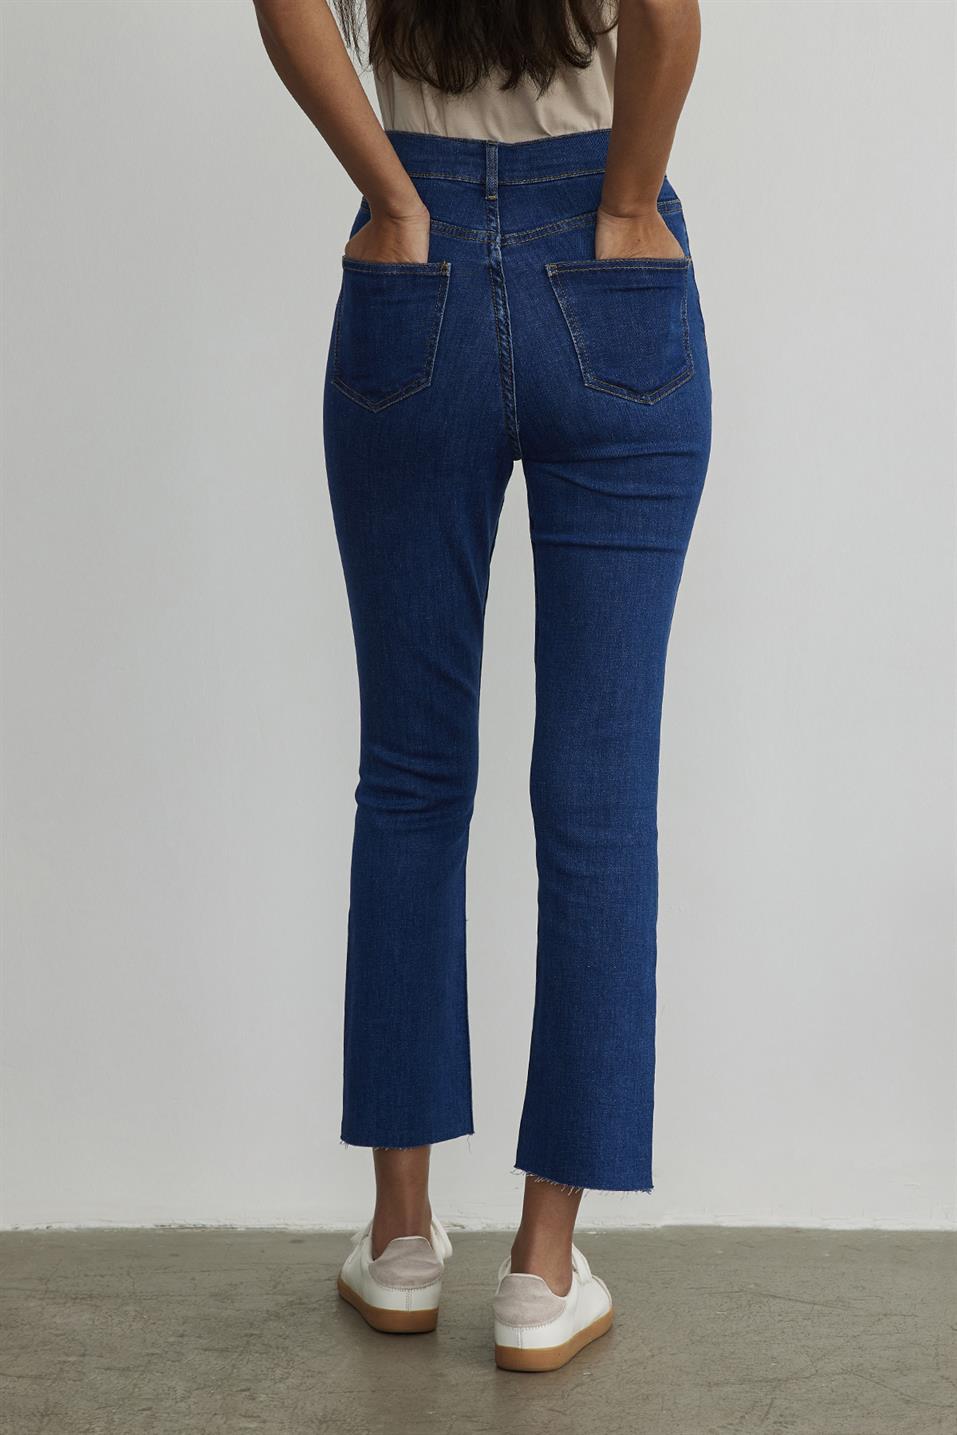 Navy Blue Bootcut Jeans